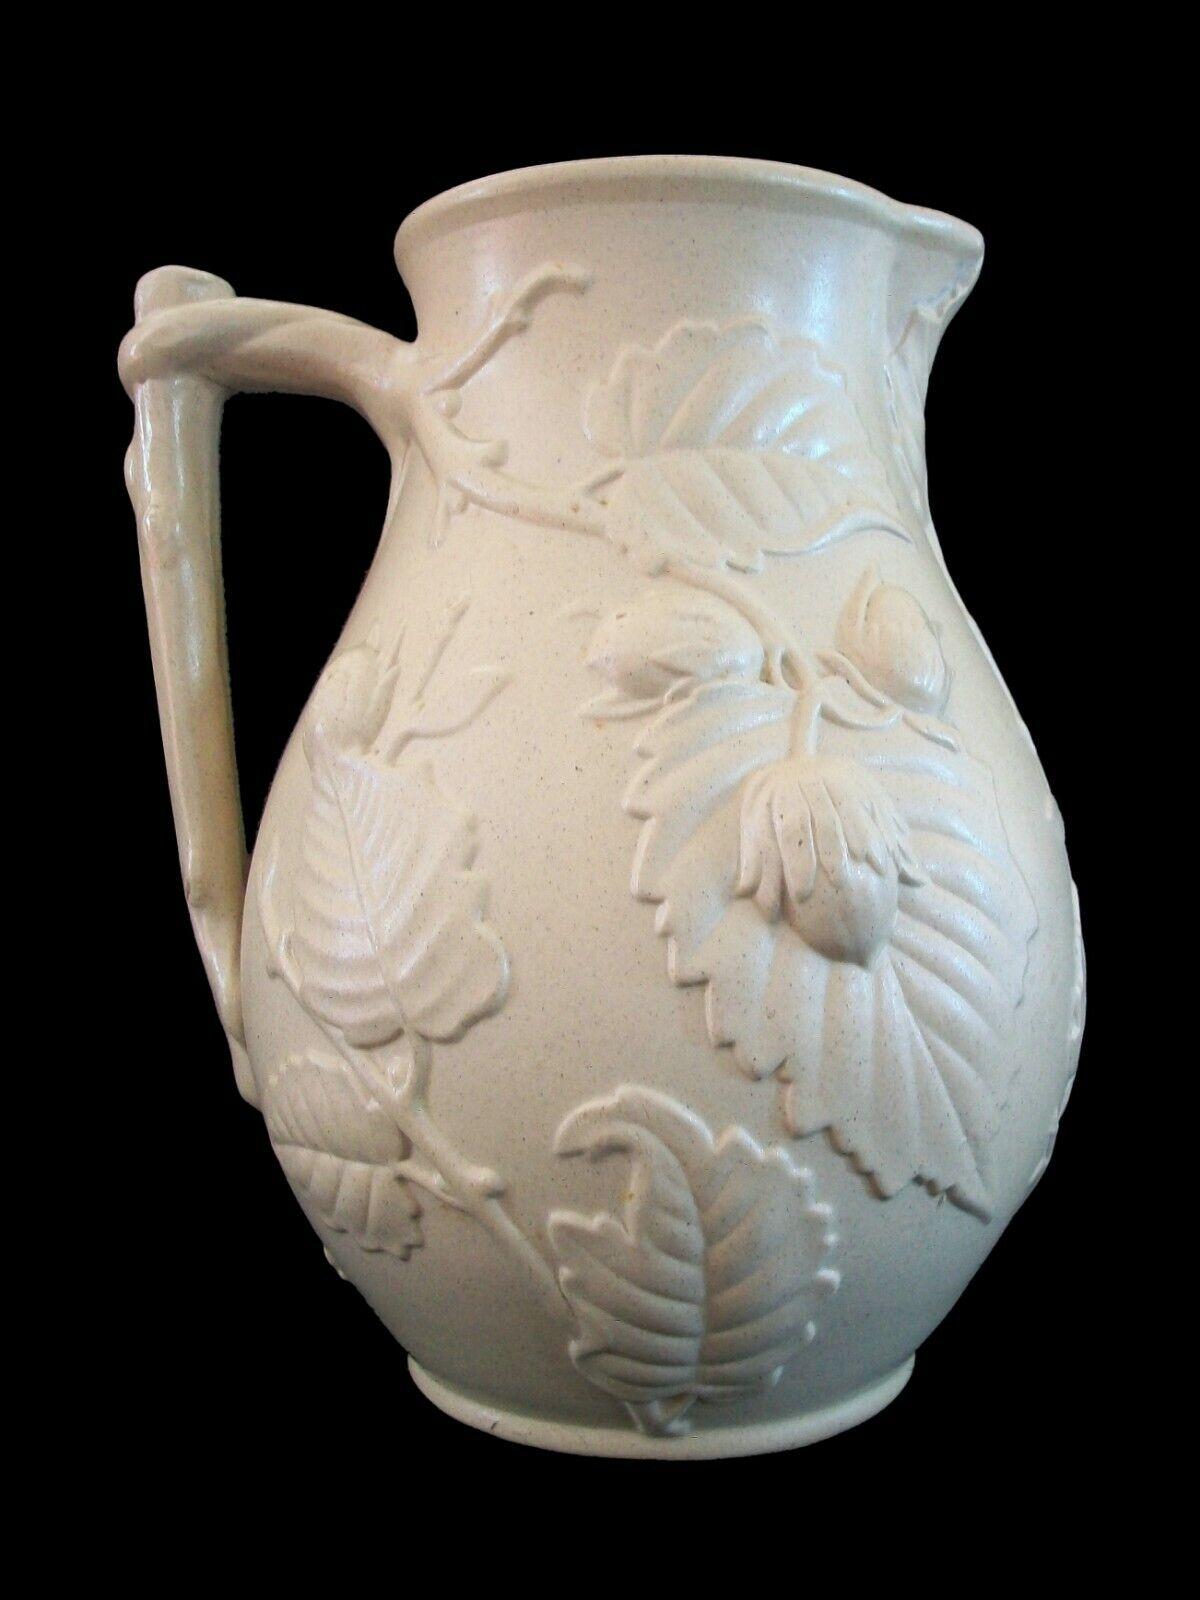 Rare Victorian 'Drabware' stoneware pitcher with embossed strawberries, leaves and branch handle - matte salt glaze to the exterior with gloss glaze to the interior - unsigned - United Kingdom - late 19th century.

Excellent/mint antique condition